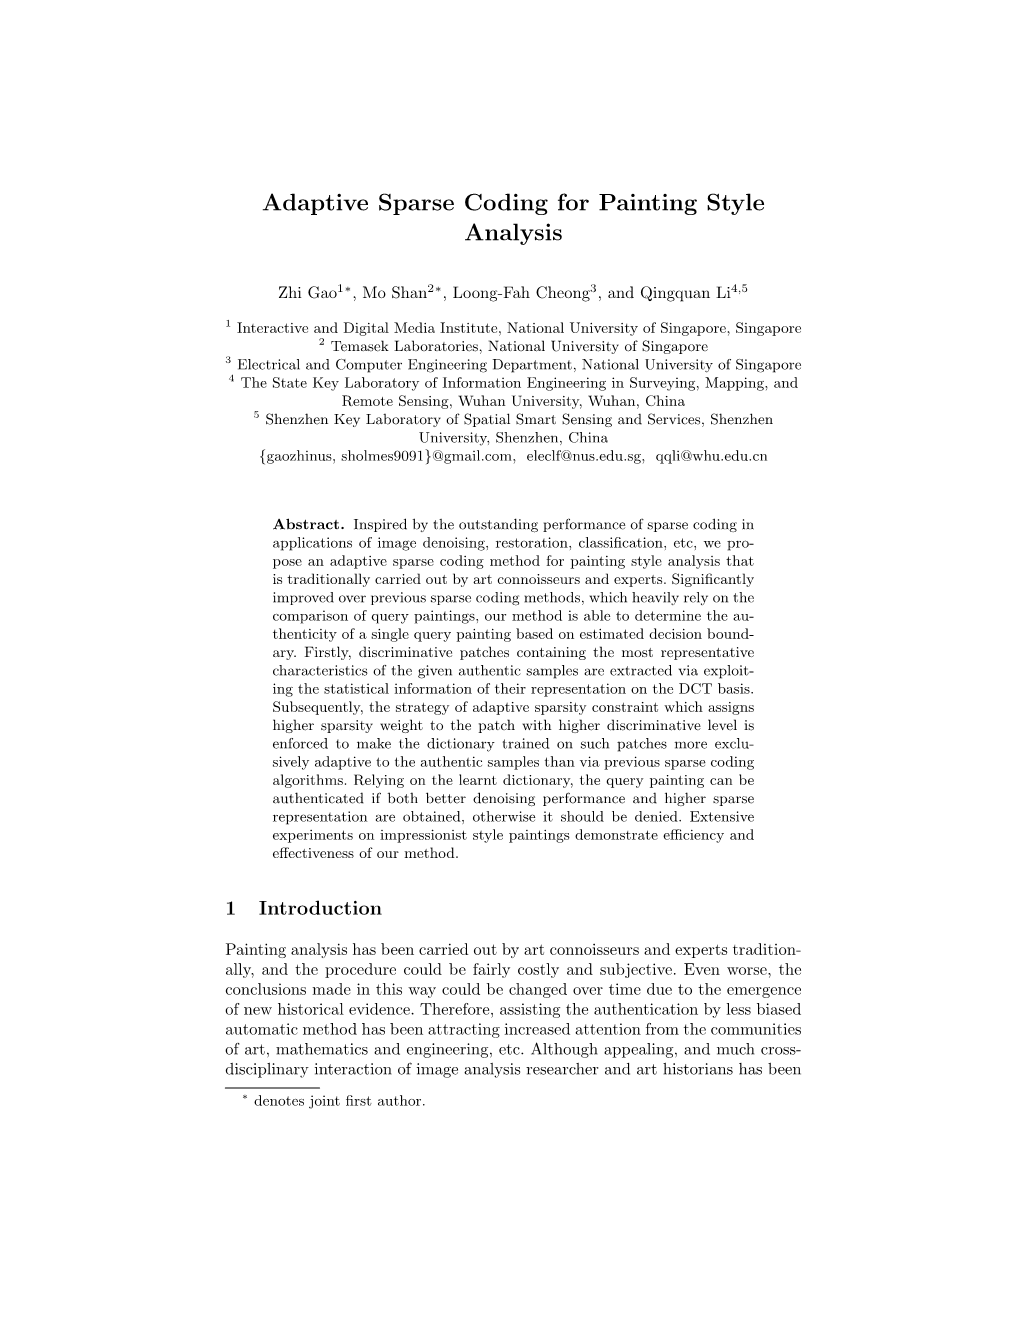 Adaptive Sparse Coding for Painting Style Analysis